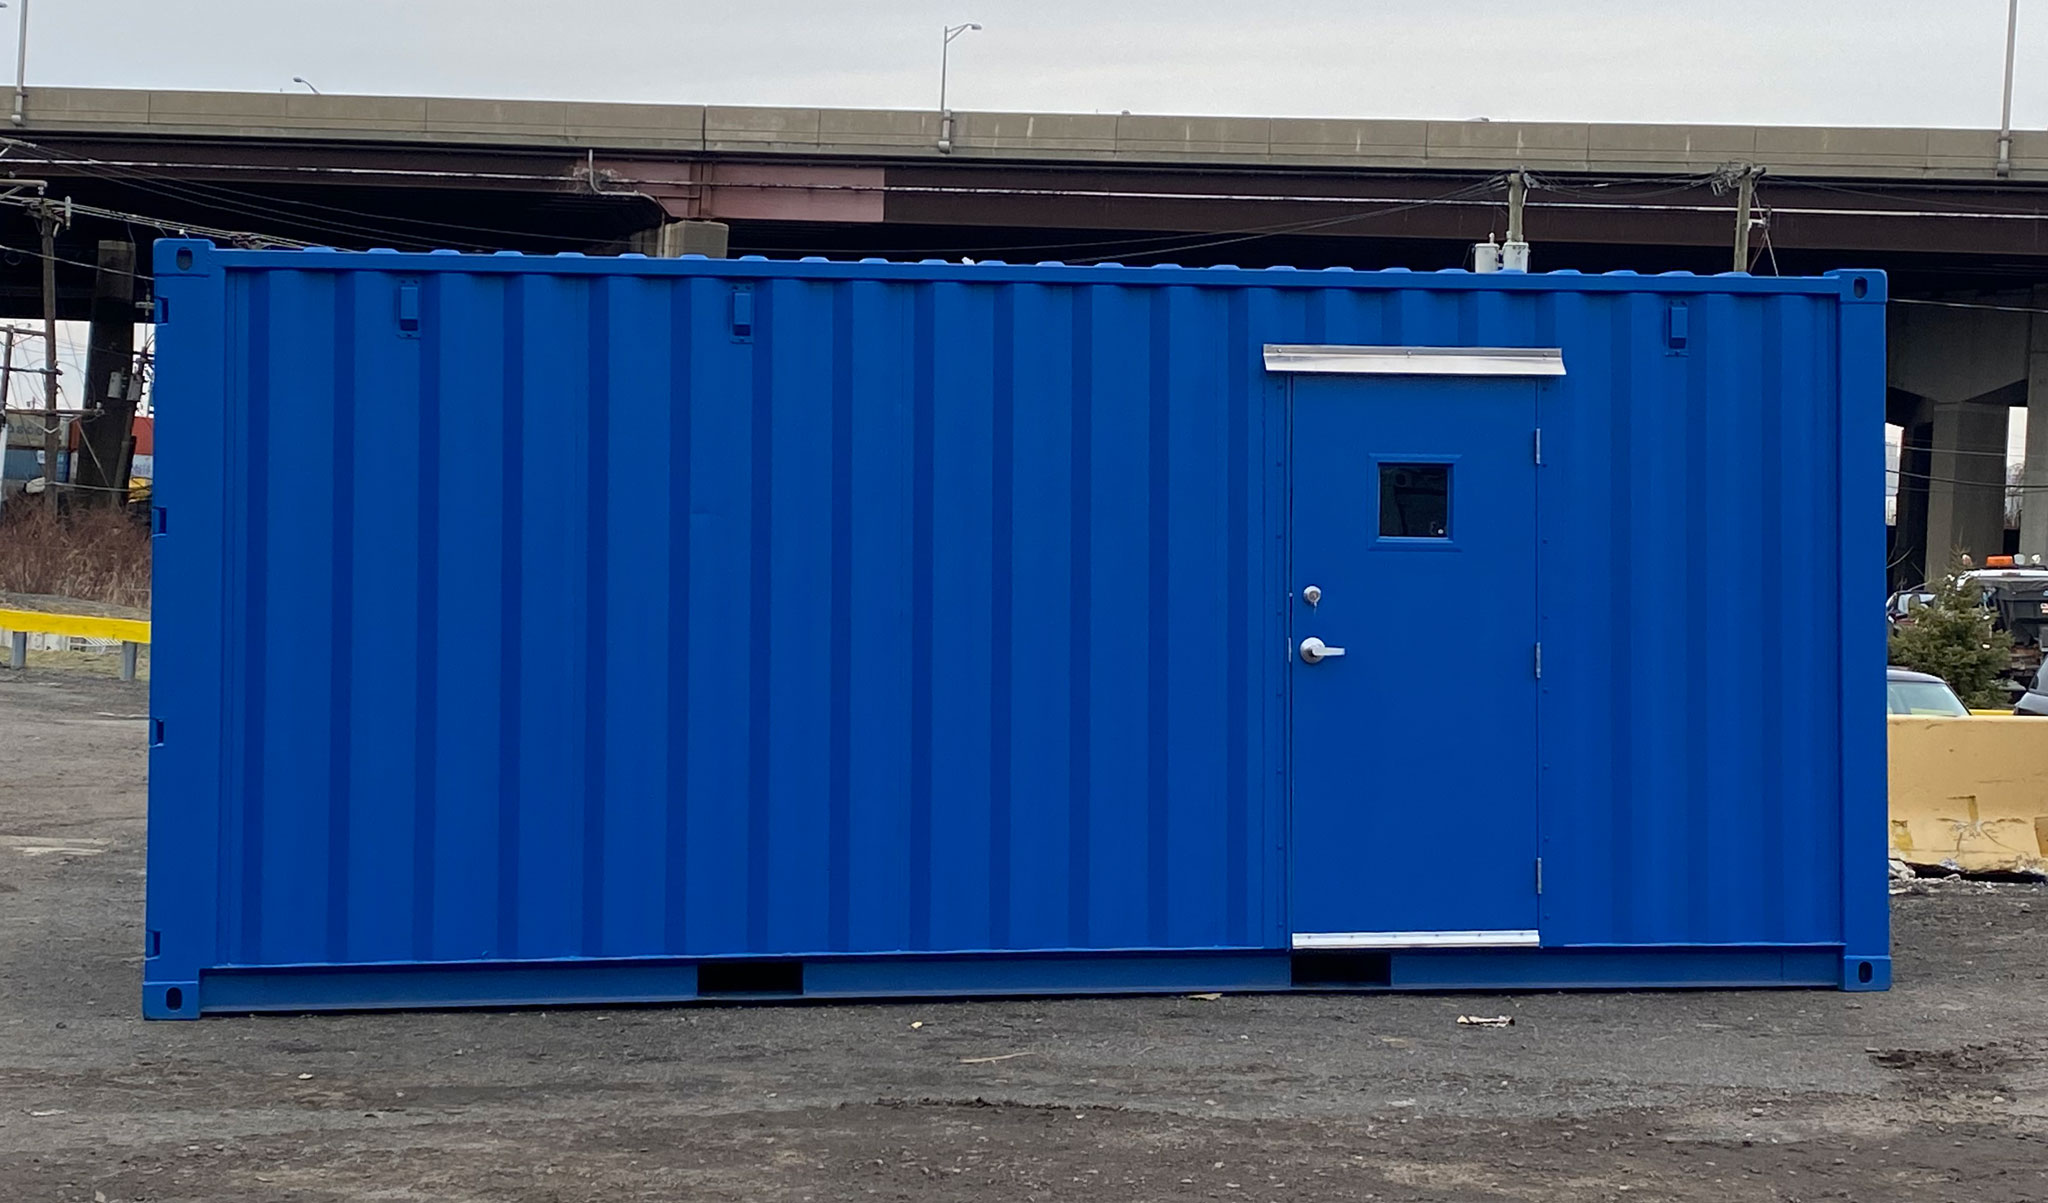 https://www.iport.com/wp-content/uploads/2020/08/shipping-container-storage-1.jpg